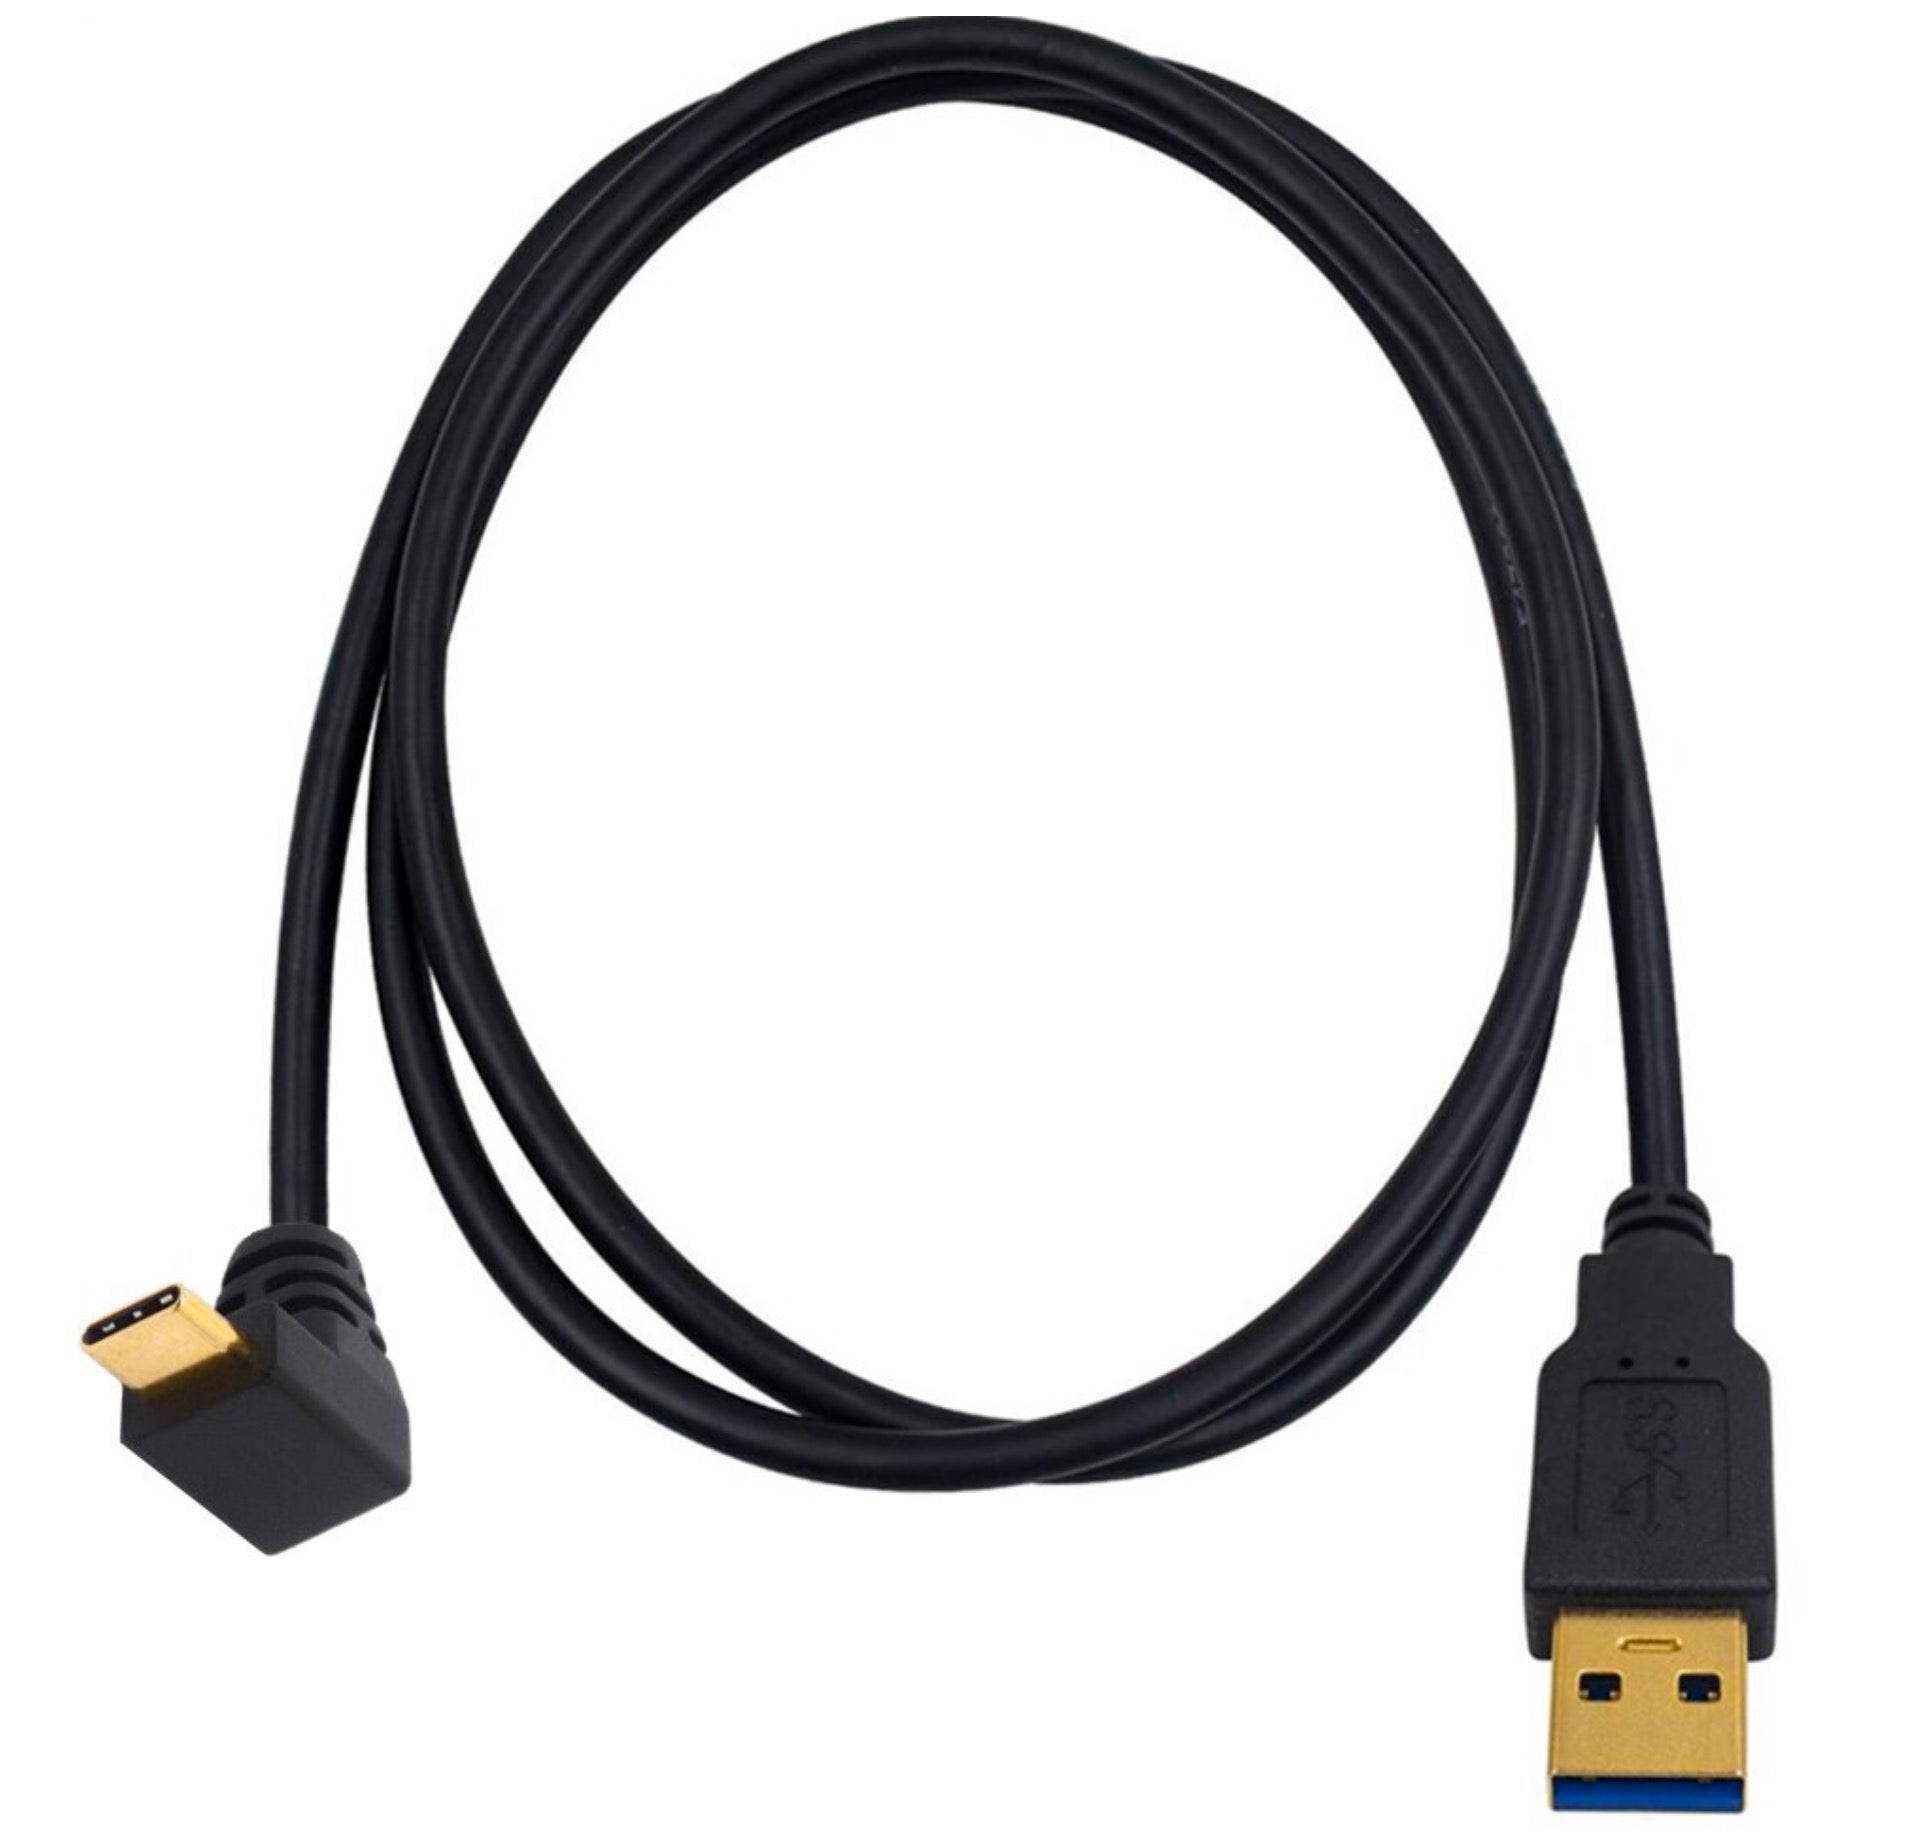 USB-A 3.0 Male to USB-C 3.1 Up/Down Angled Male Charge Sync Cable